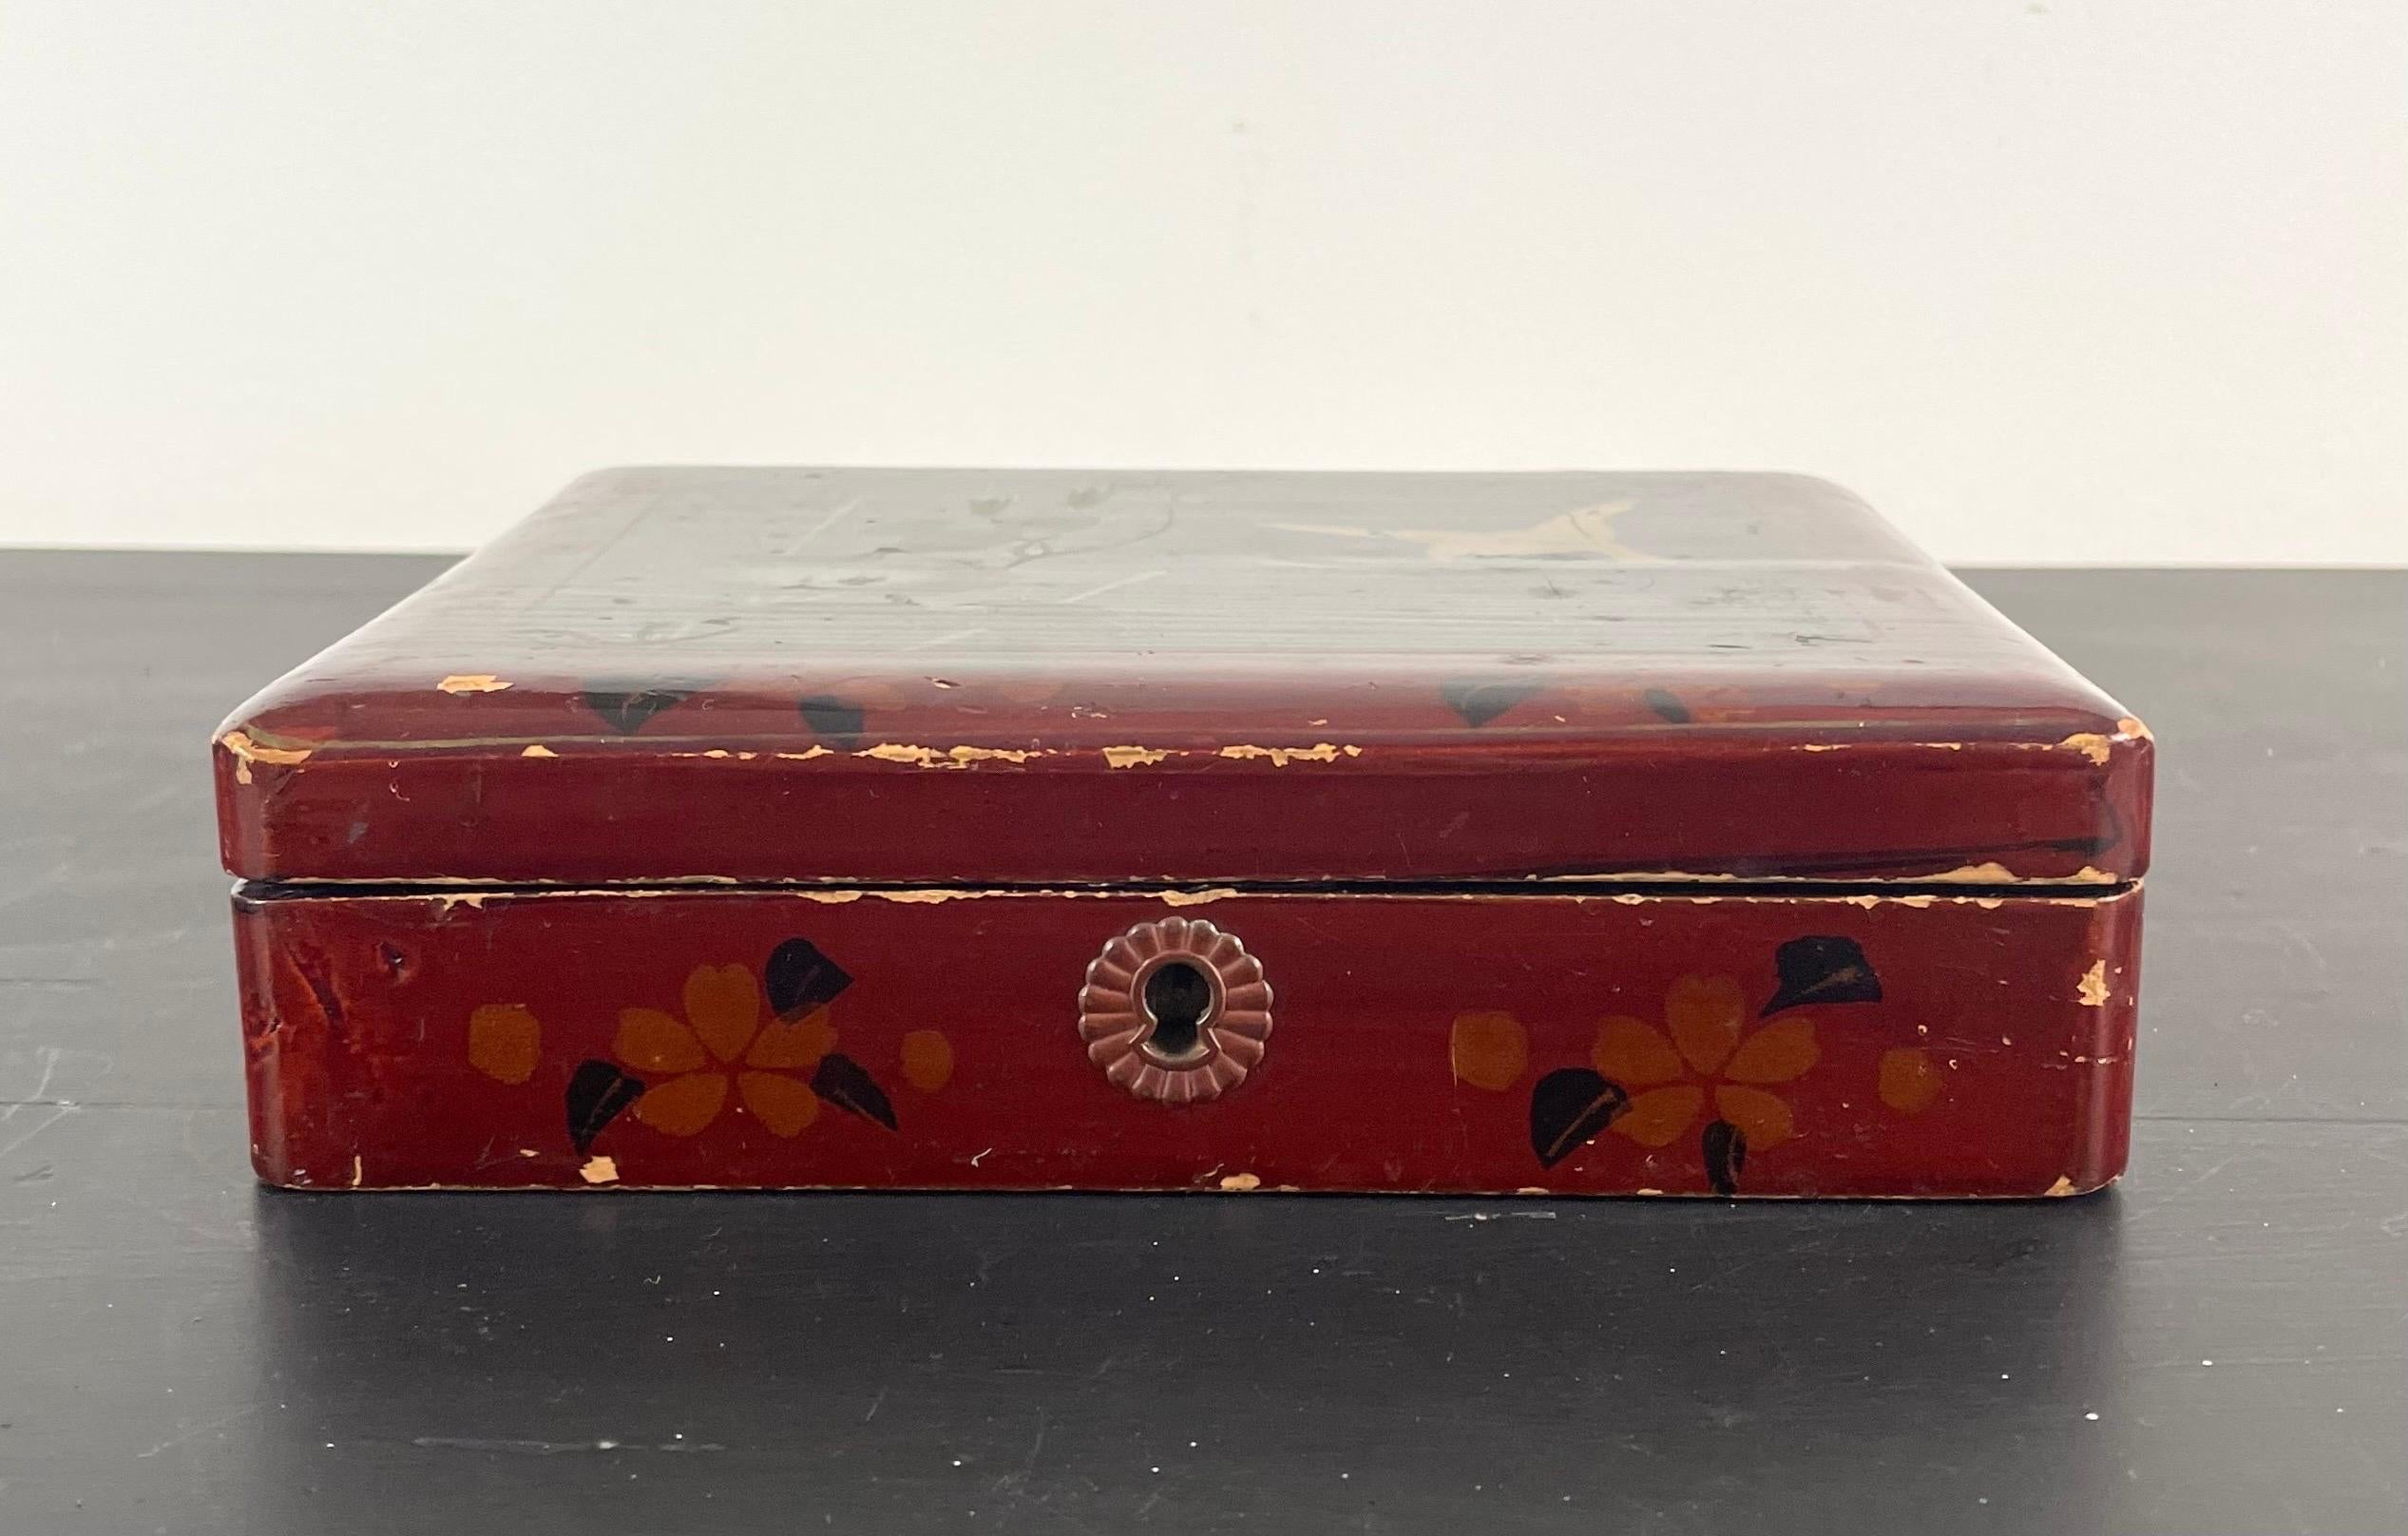 Japanese lacquered box decorated with birds and foliage
signed 
Lacquered inside and outside
Late 19th Century
Without key
Some scratches and losses
Ideal for storing jewelry.